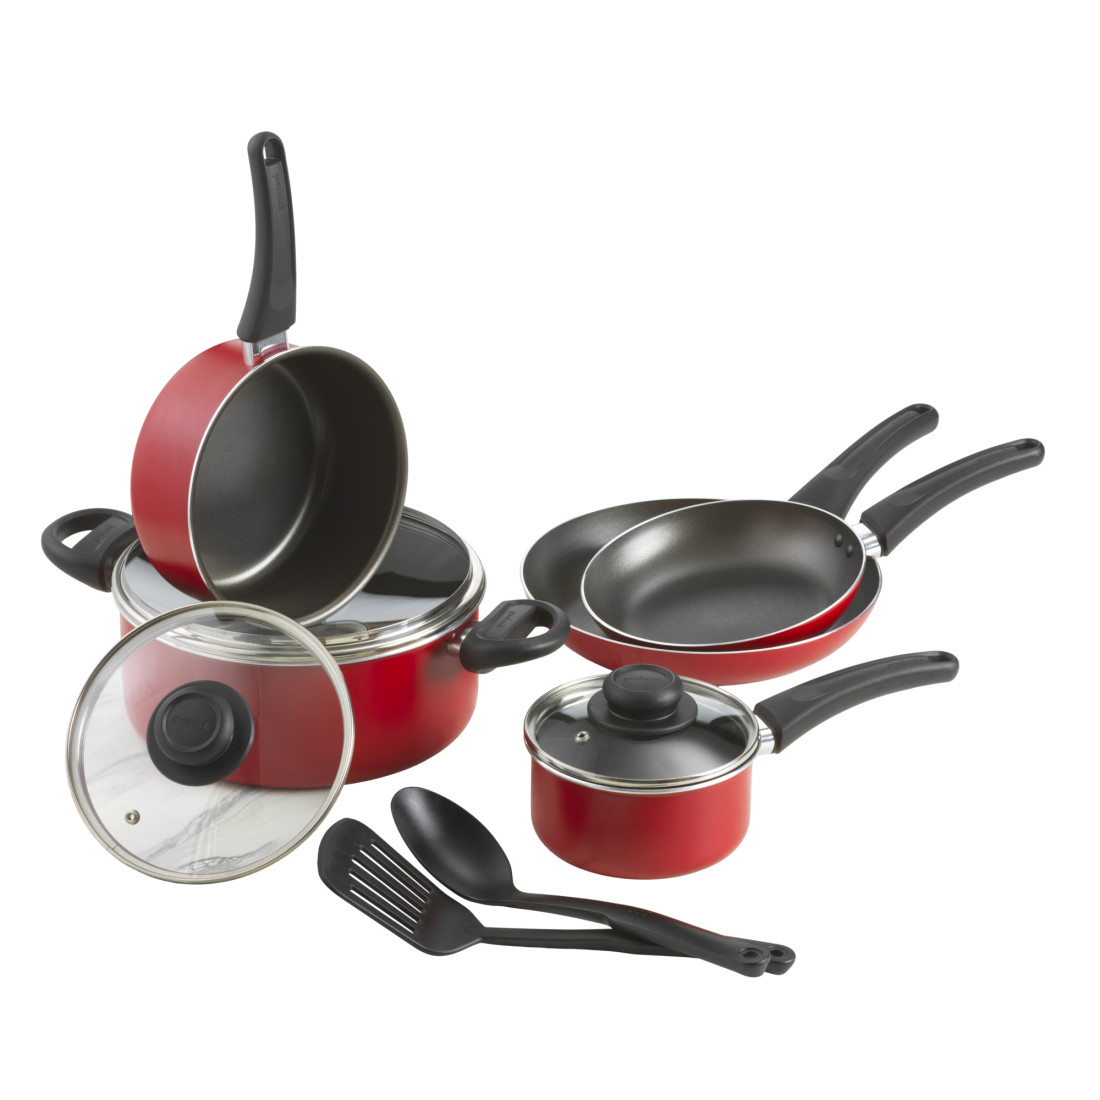  GoodCook Dishwasher Safe Nonstick, Even Heating Cookware, 10  pc, Non-stick black: Home & Kitchen